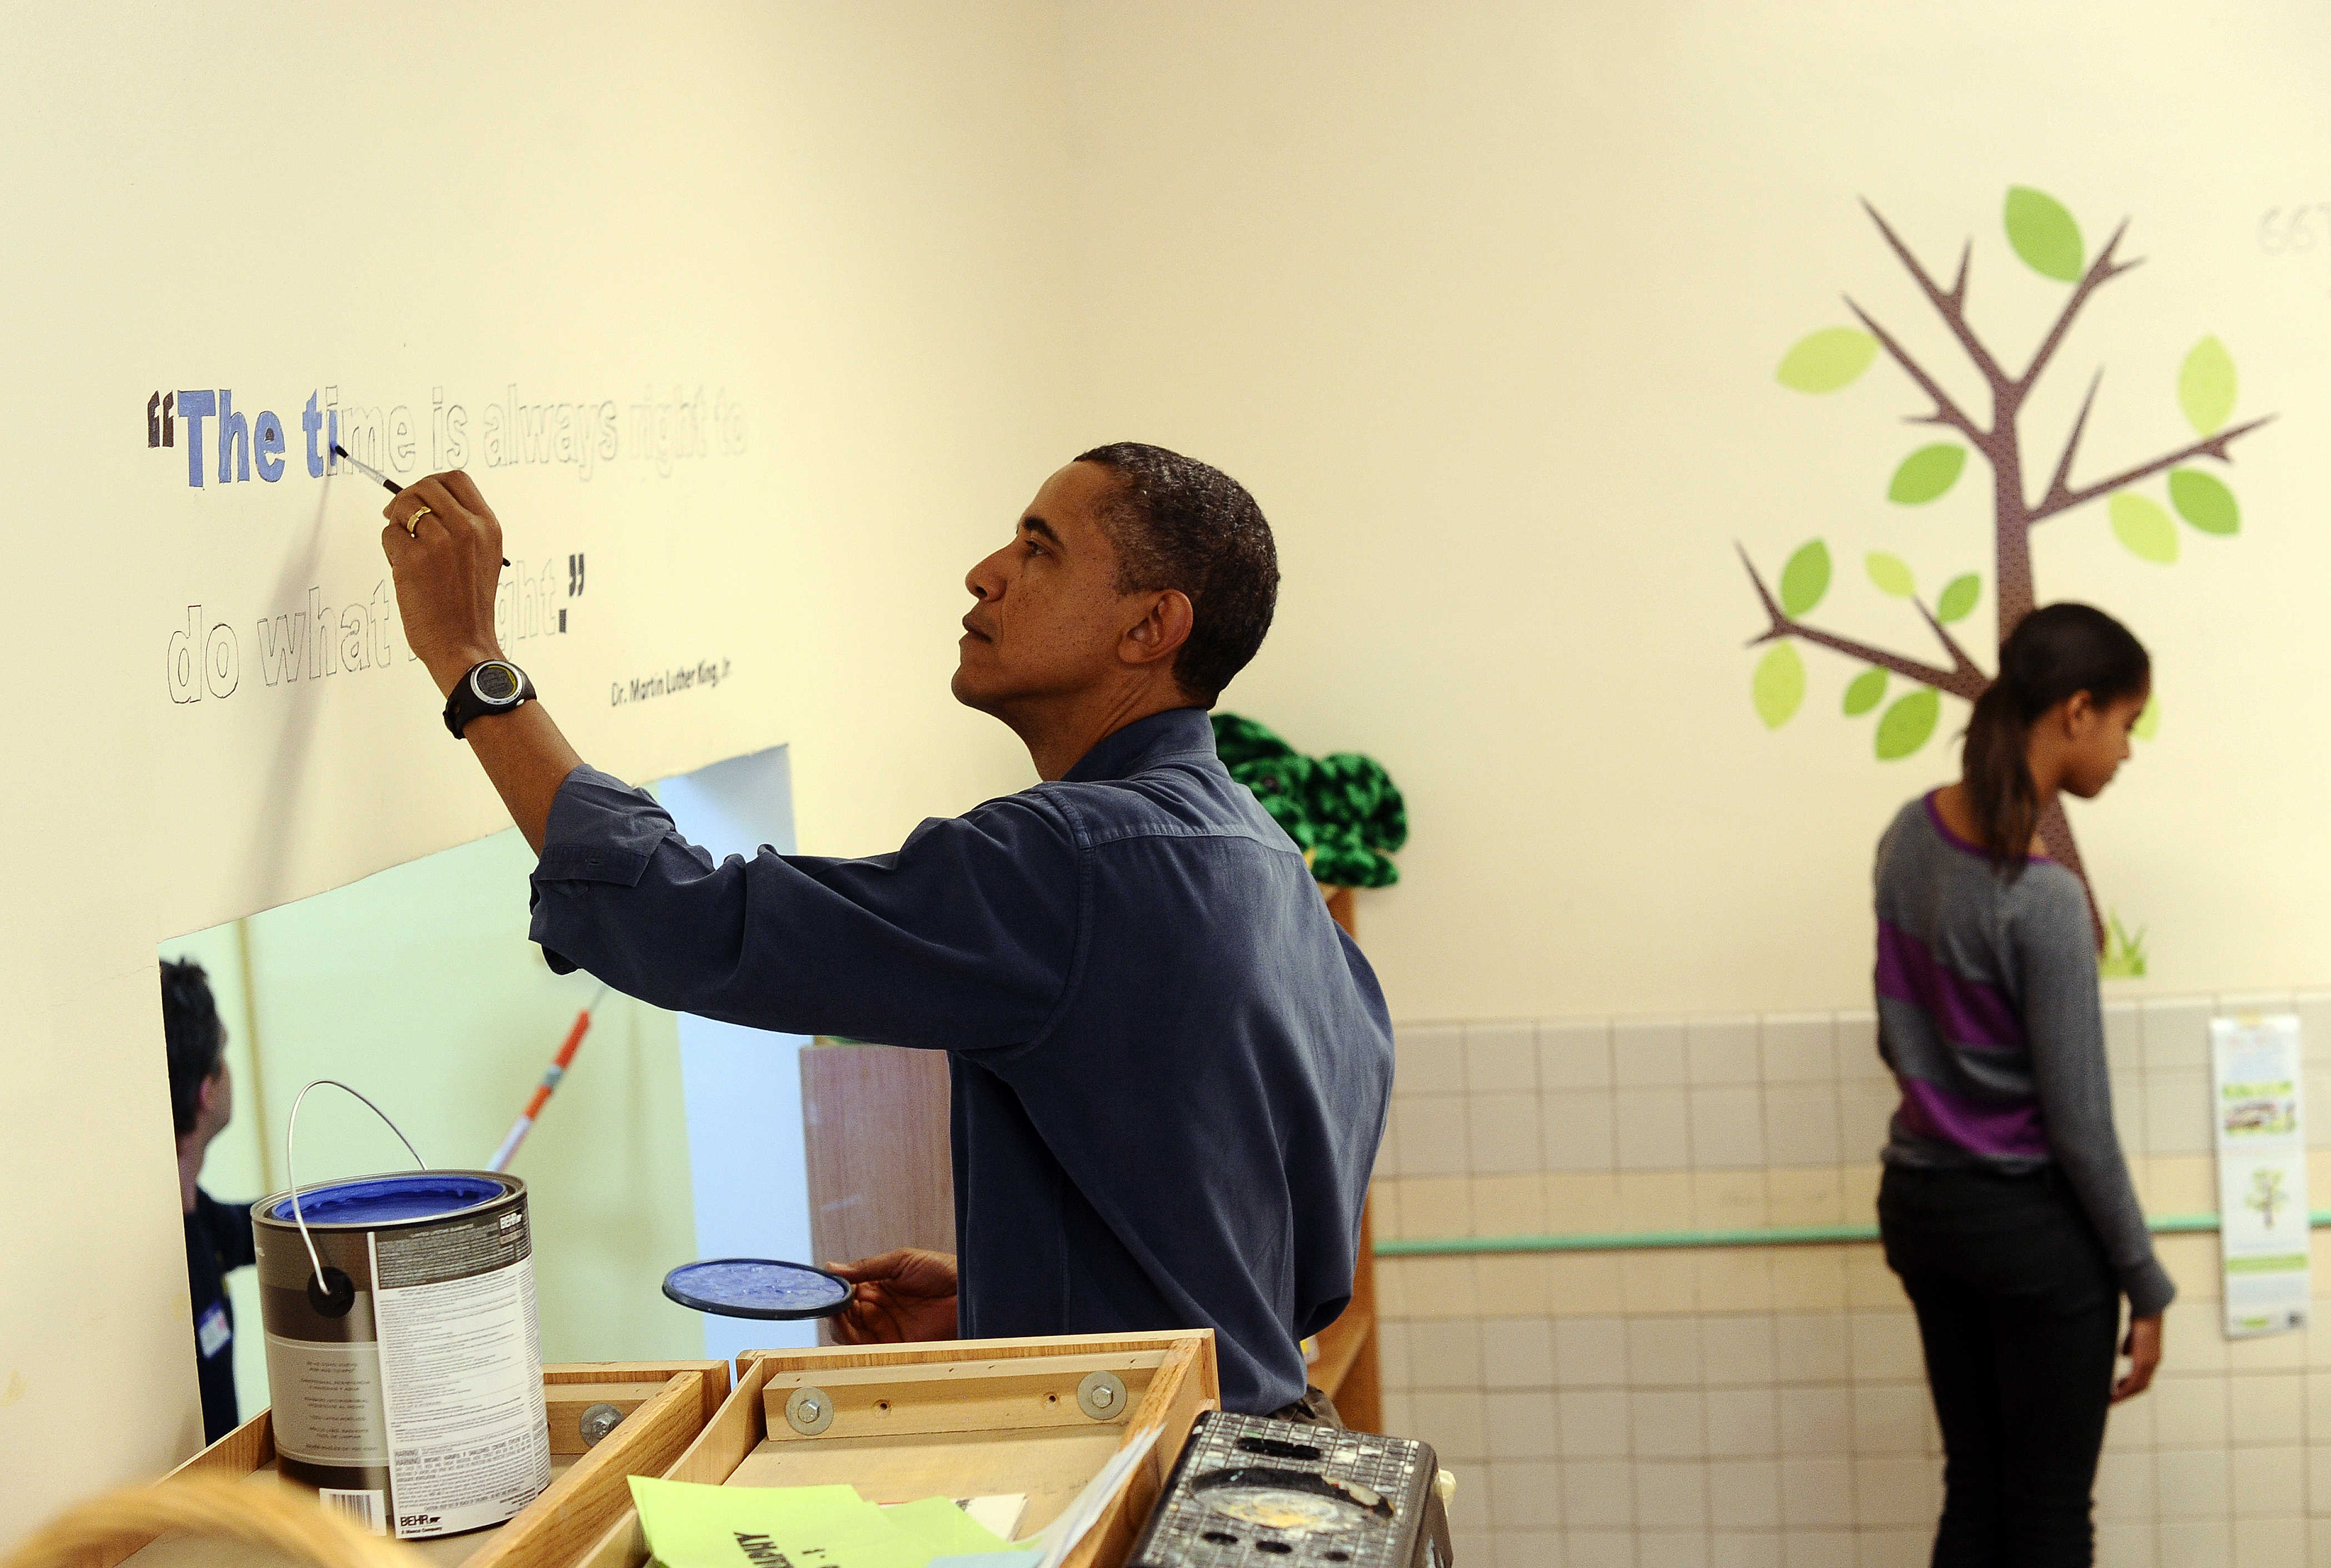 US President Barack Obama (L) paints a quote of Martin Luther King Jr. on the wall of a library at the Browne Education Center in Washington, D.C., on January 16, 2012, as taking part in a community service project. (Jewel Samad—AFP/Getty Images)